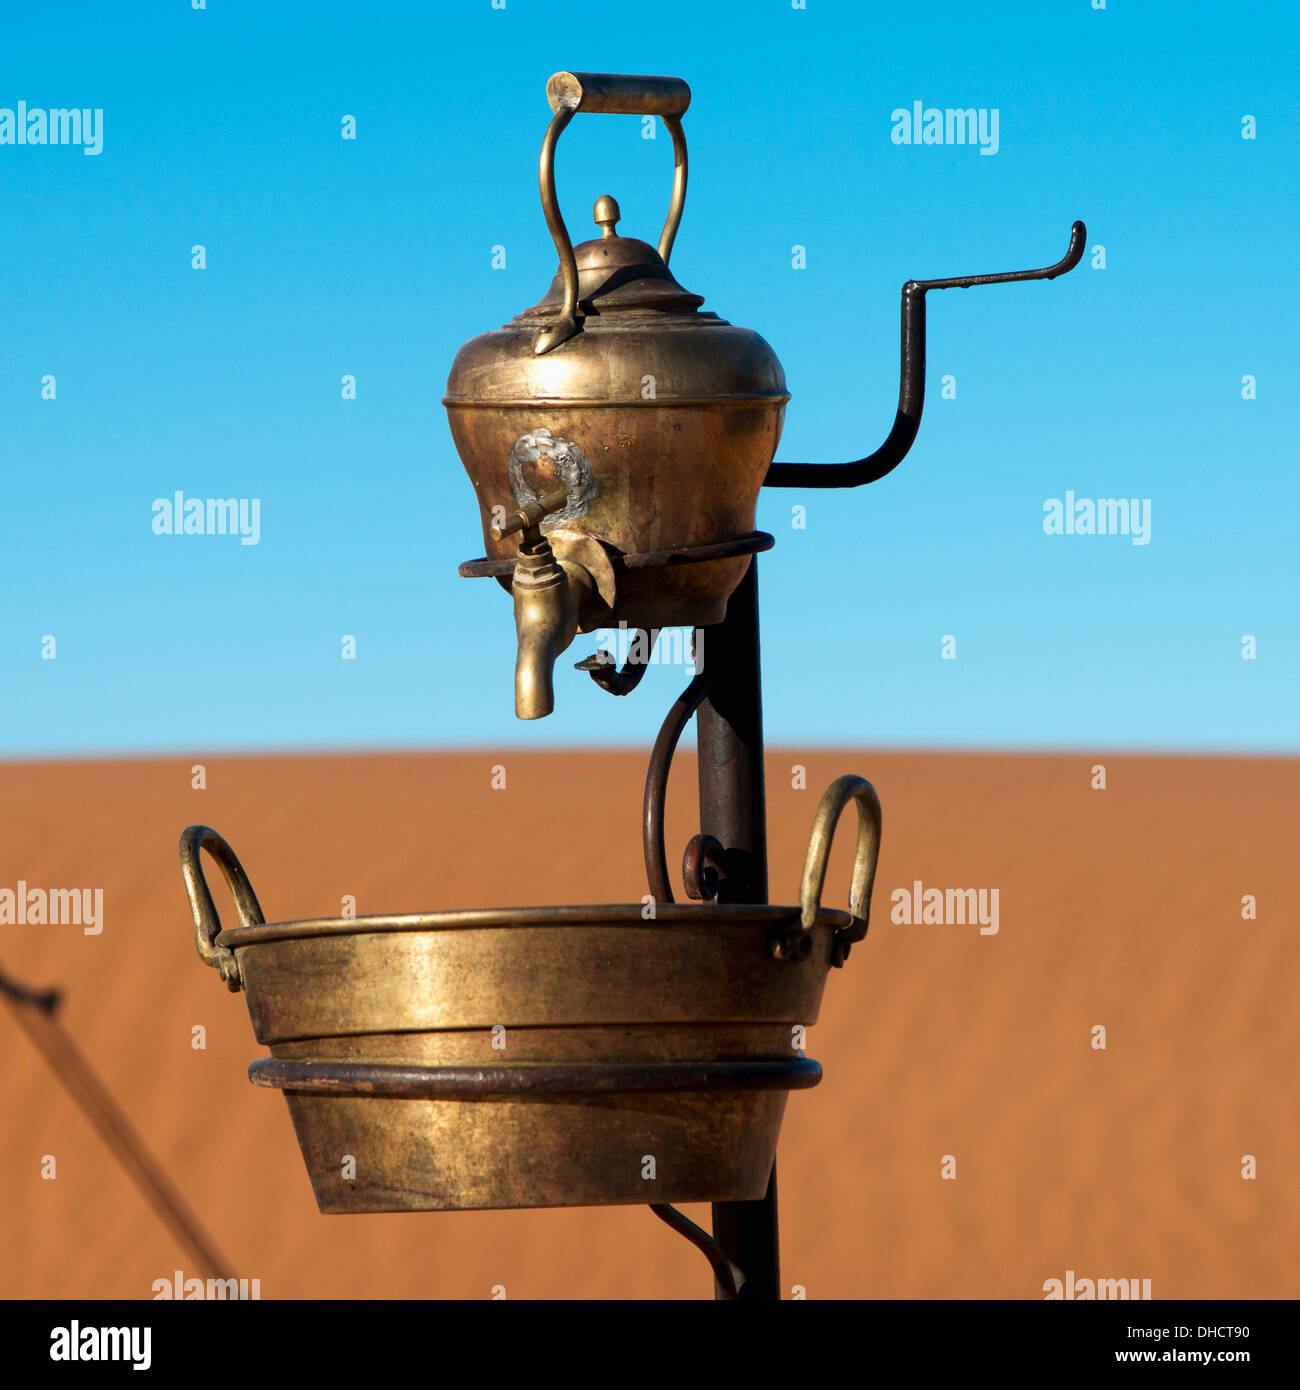 A Metal Teapot With A Tap And Bucket Below With A Sandy Landscape And Blue Sky Stock Photo